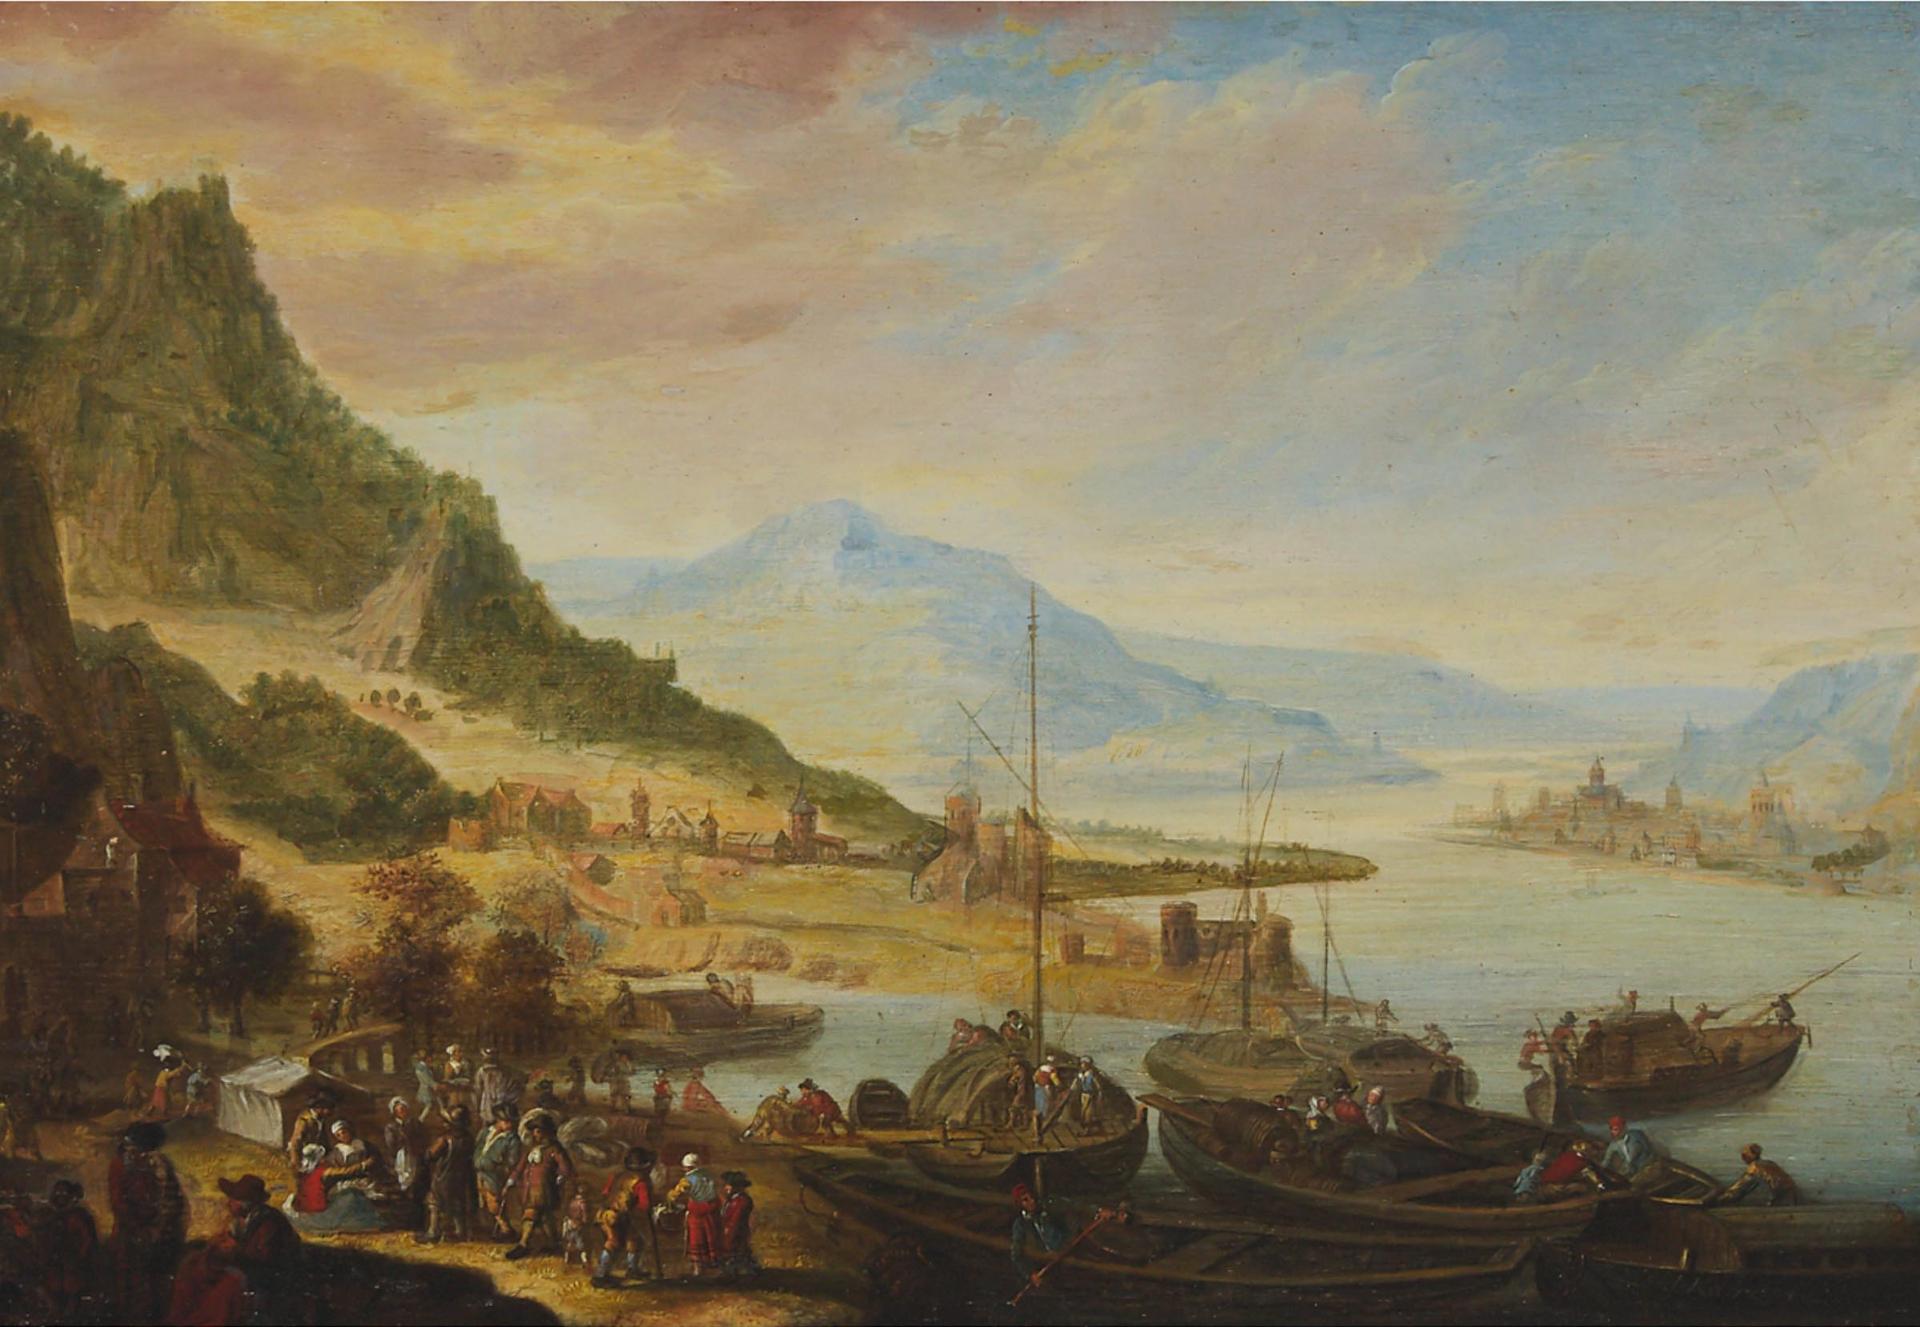 Barend van Kalraet (1649-1721) - Busy Village Harbour With Boats Coming And Going, With Many Figures Unloading Supplies And Meeting In Groups